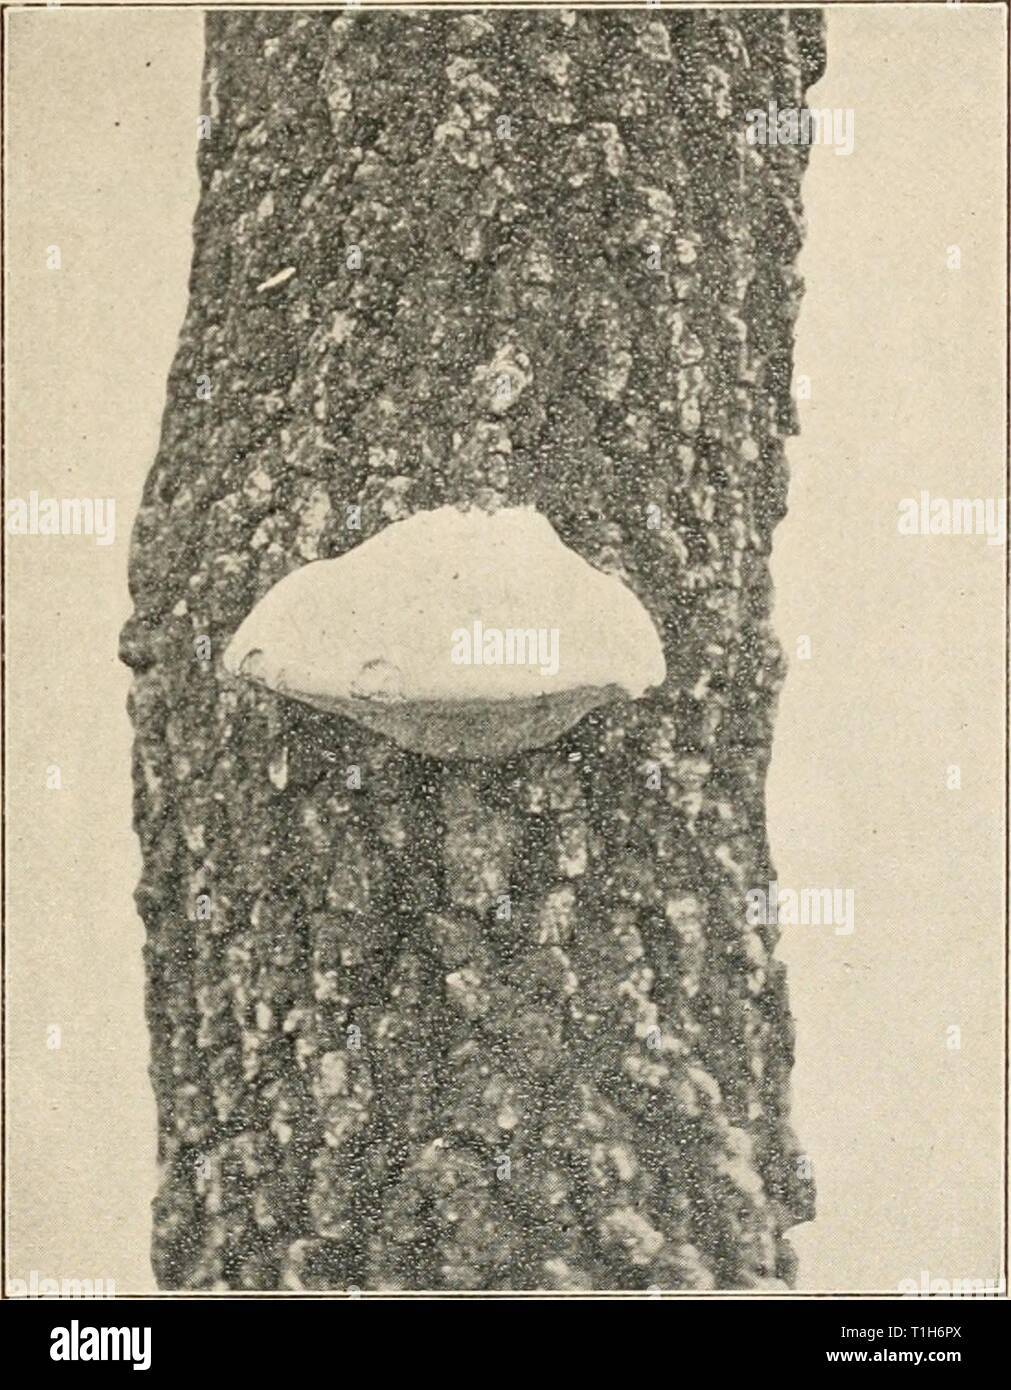 Diseases of deciduous forest trees Diseases of deciduous forest trees  diseasesofdecidu00schruoft Year: 1909  DISEASES CAUSED BY WOUND FUNGI. 41 SOFT ROT OF OAKS CAUSED BY POLYPORUS OBTUSUS. A number of species of the black oaks, notably Quercus marilandica Muench. and Q. velutina Lam., are affected with a disease of the heart- wood which has been determined by Spaulding (94) to be due to Poly- j)orus ohtusus Berk. Diseased trees have been found in the eastern part of the United States, and notably in the central Mississippi Val- ley; a large number of trees are usually found aft'ected in a lo Stock Photo